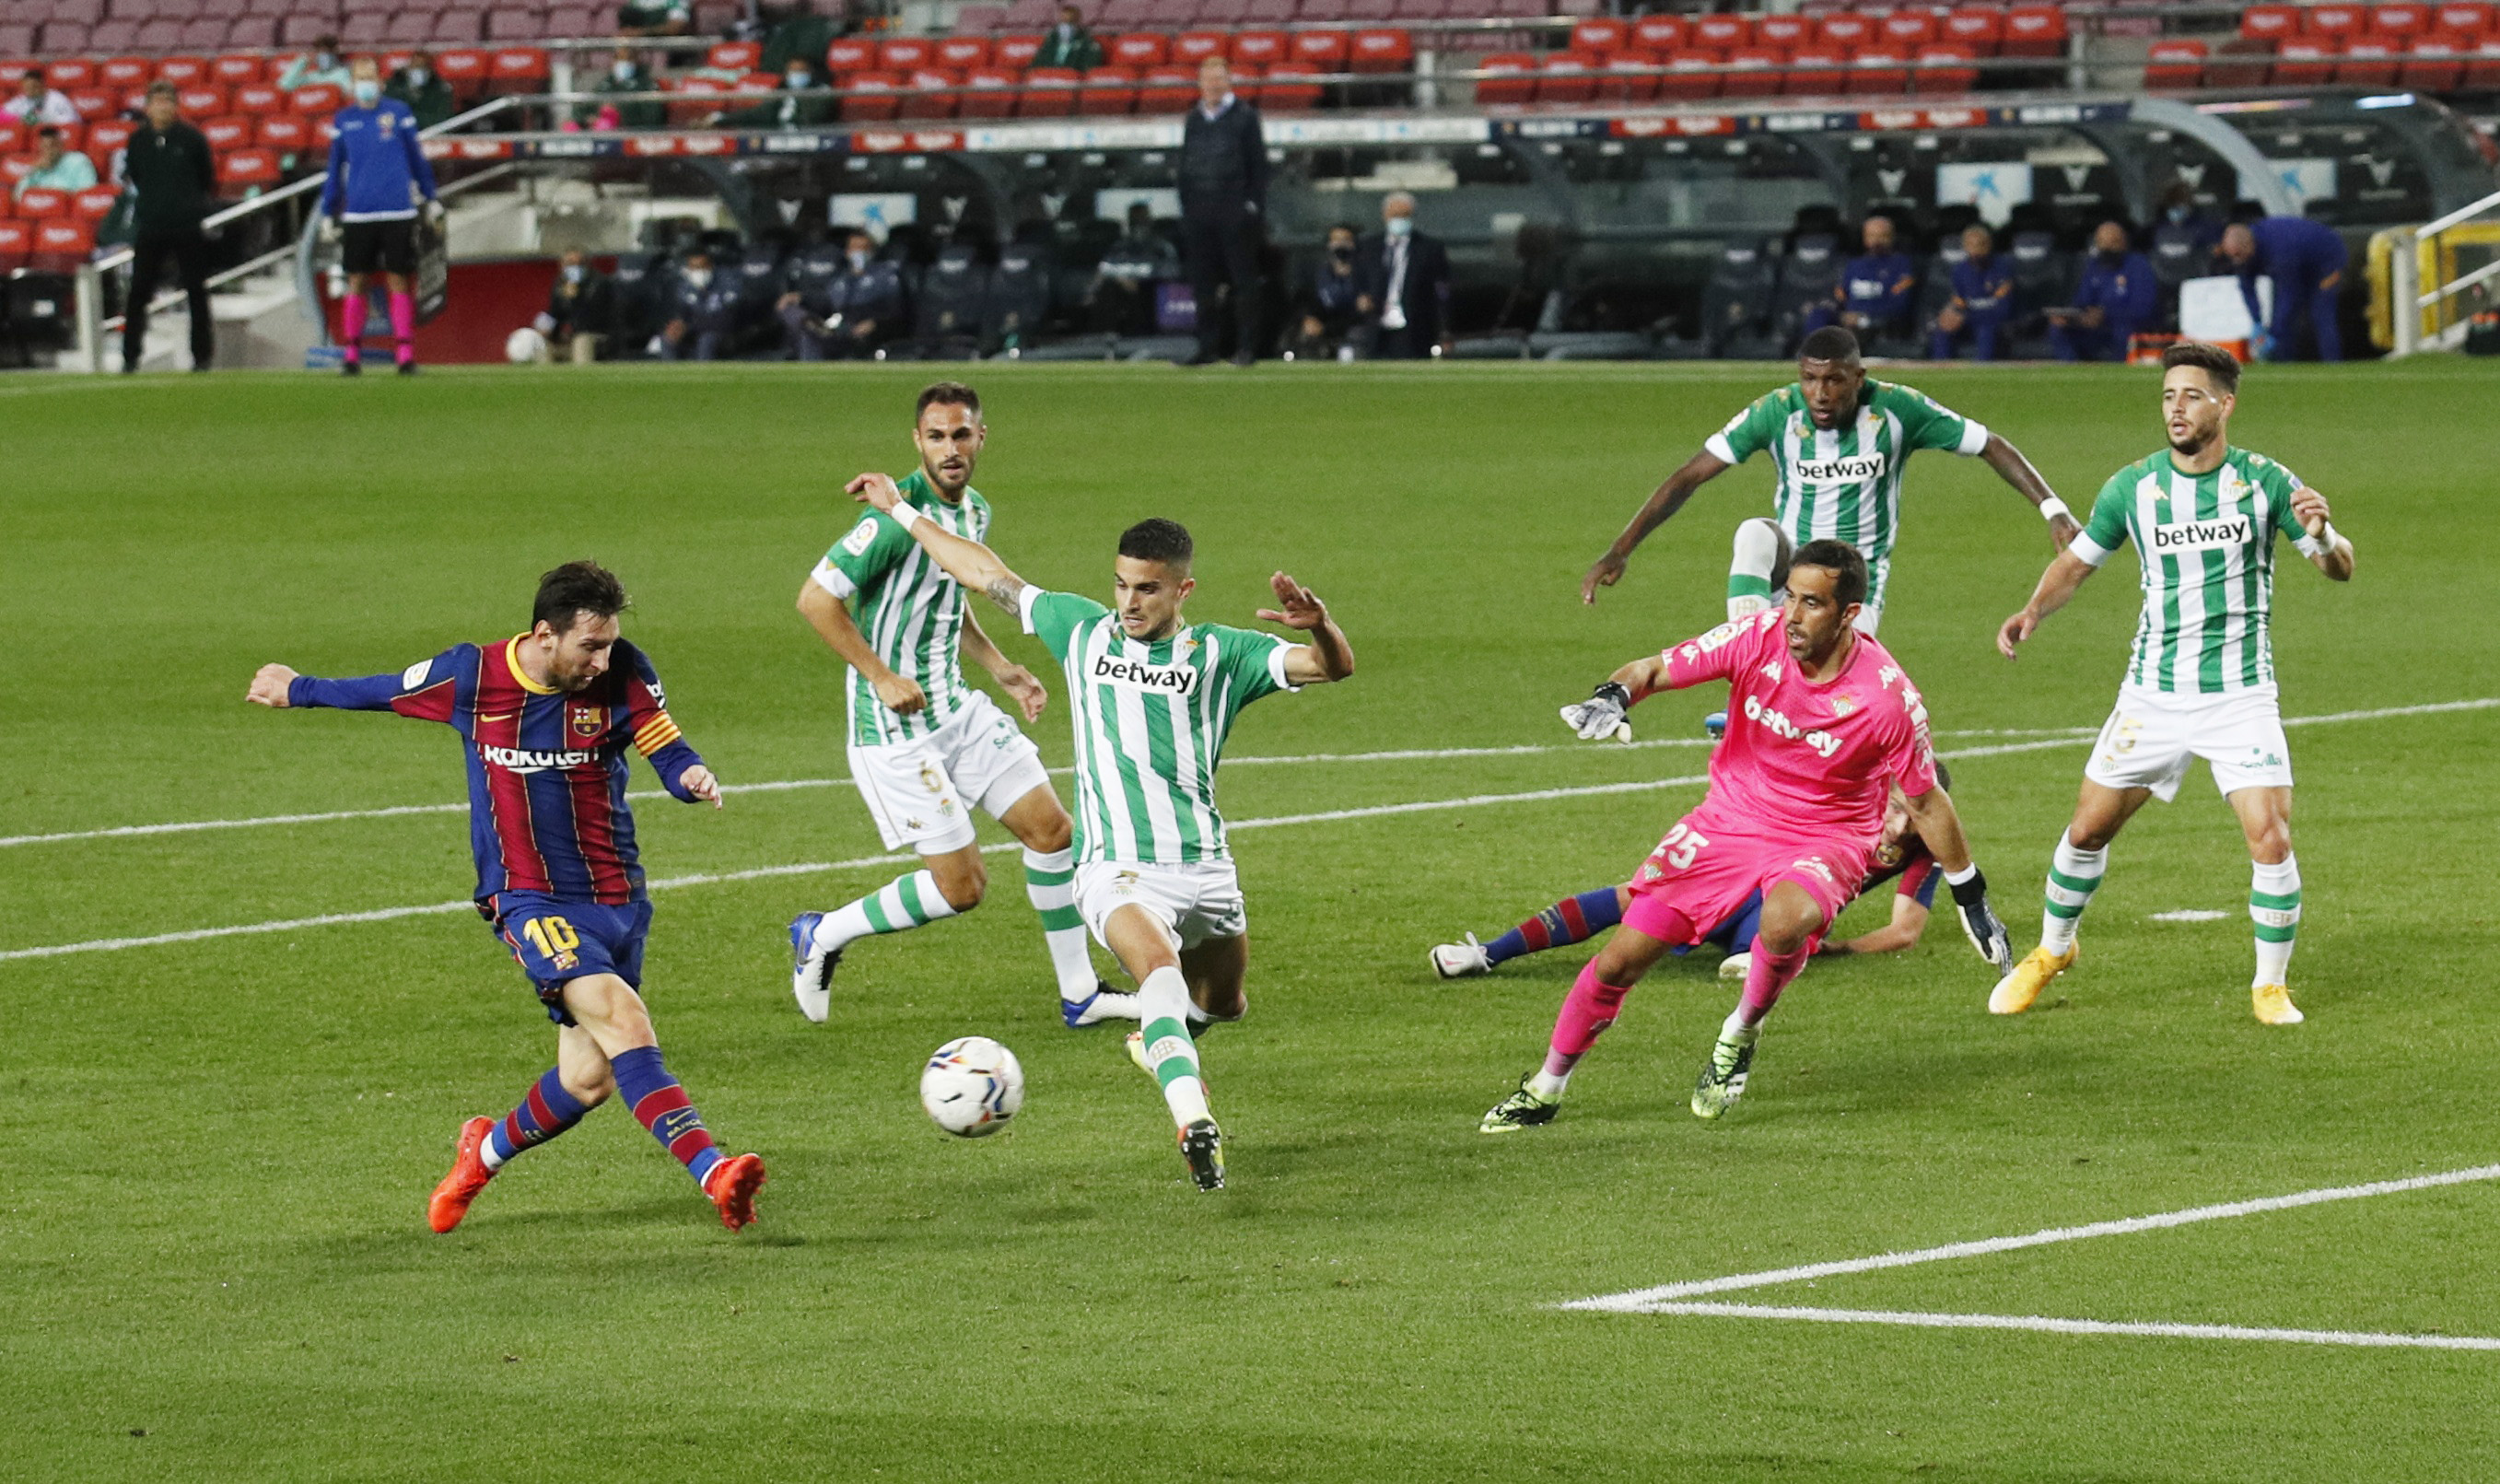 Barcelona's Lionel Messi scores a disallowed goal n during the La Liga Santander match between FC Barcelona and Real Betis, at Camp Nou, in Barcelona, Spain, on November 7, 2020. Photo: Reuters